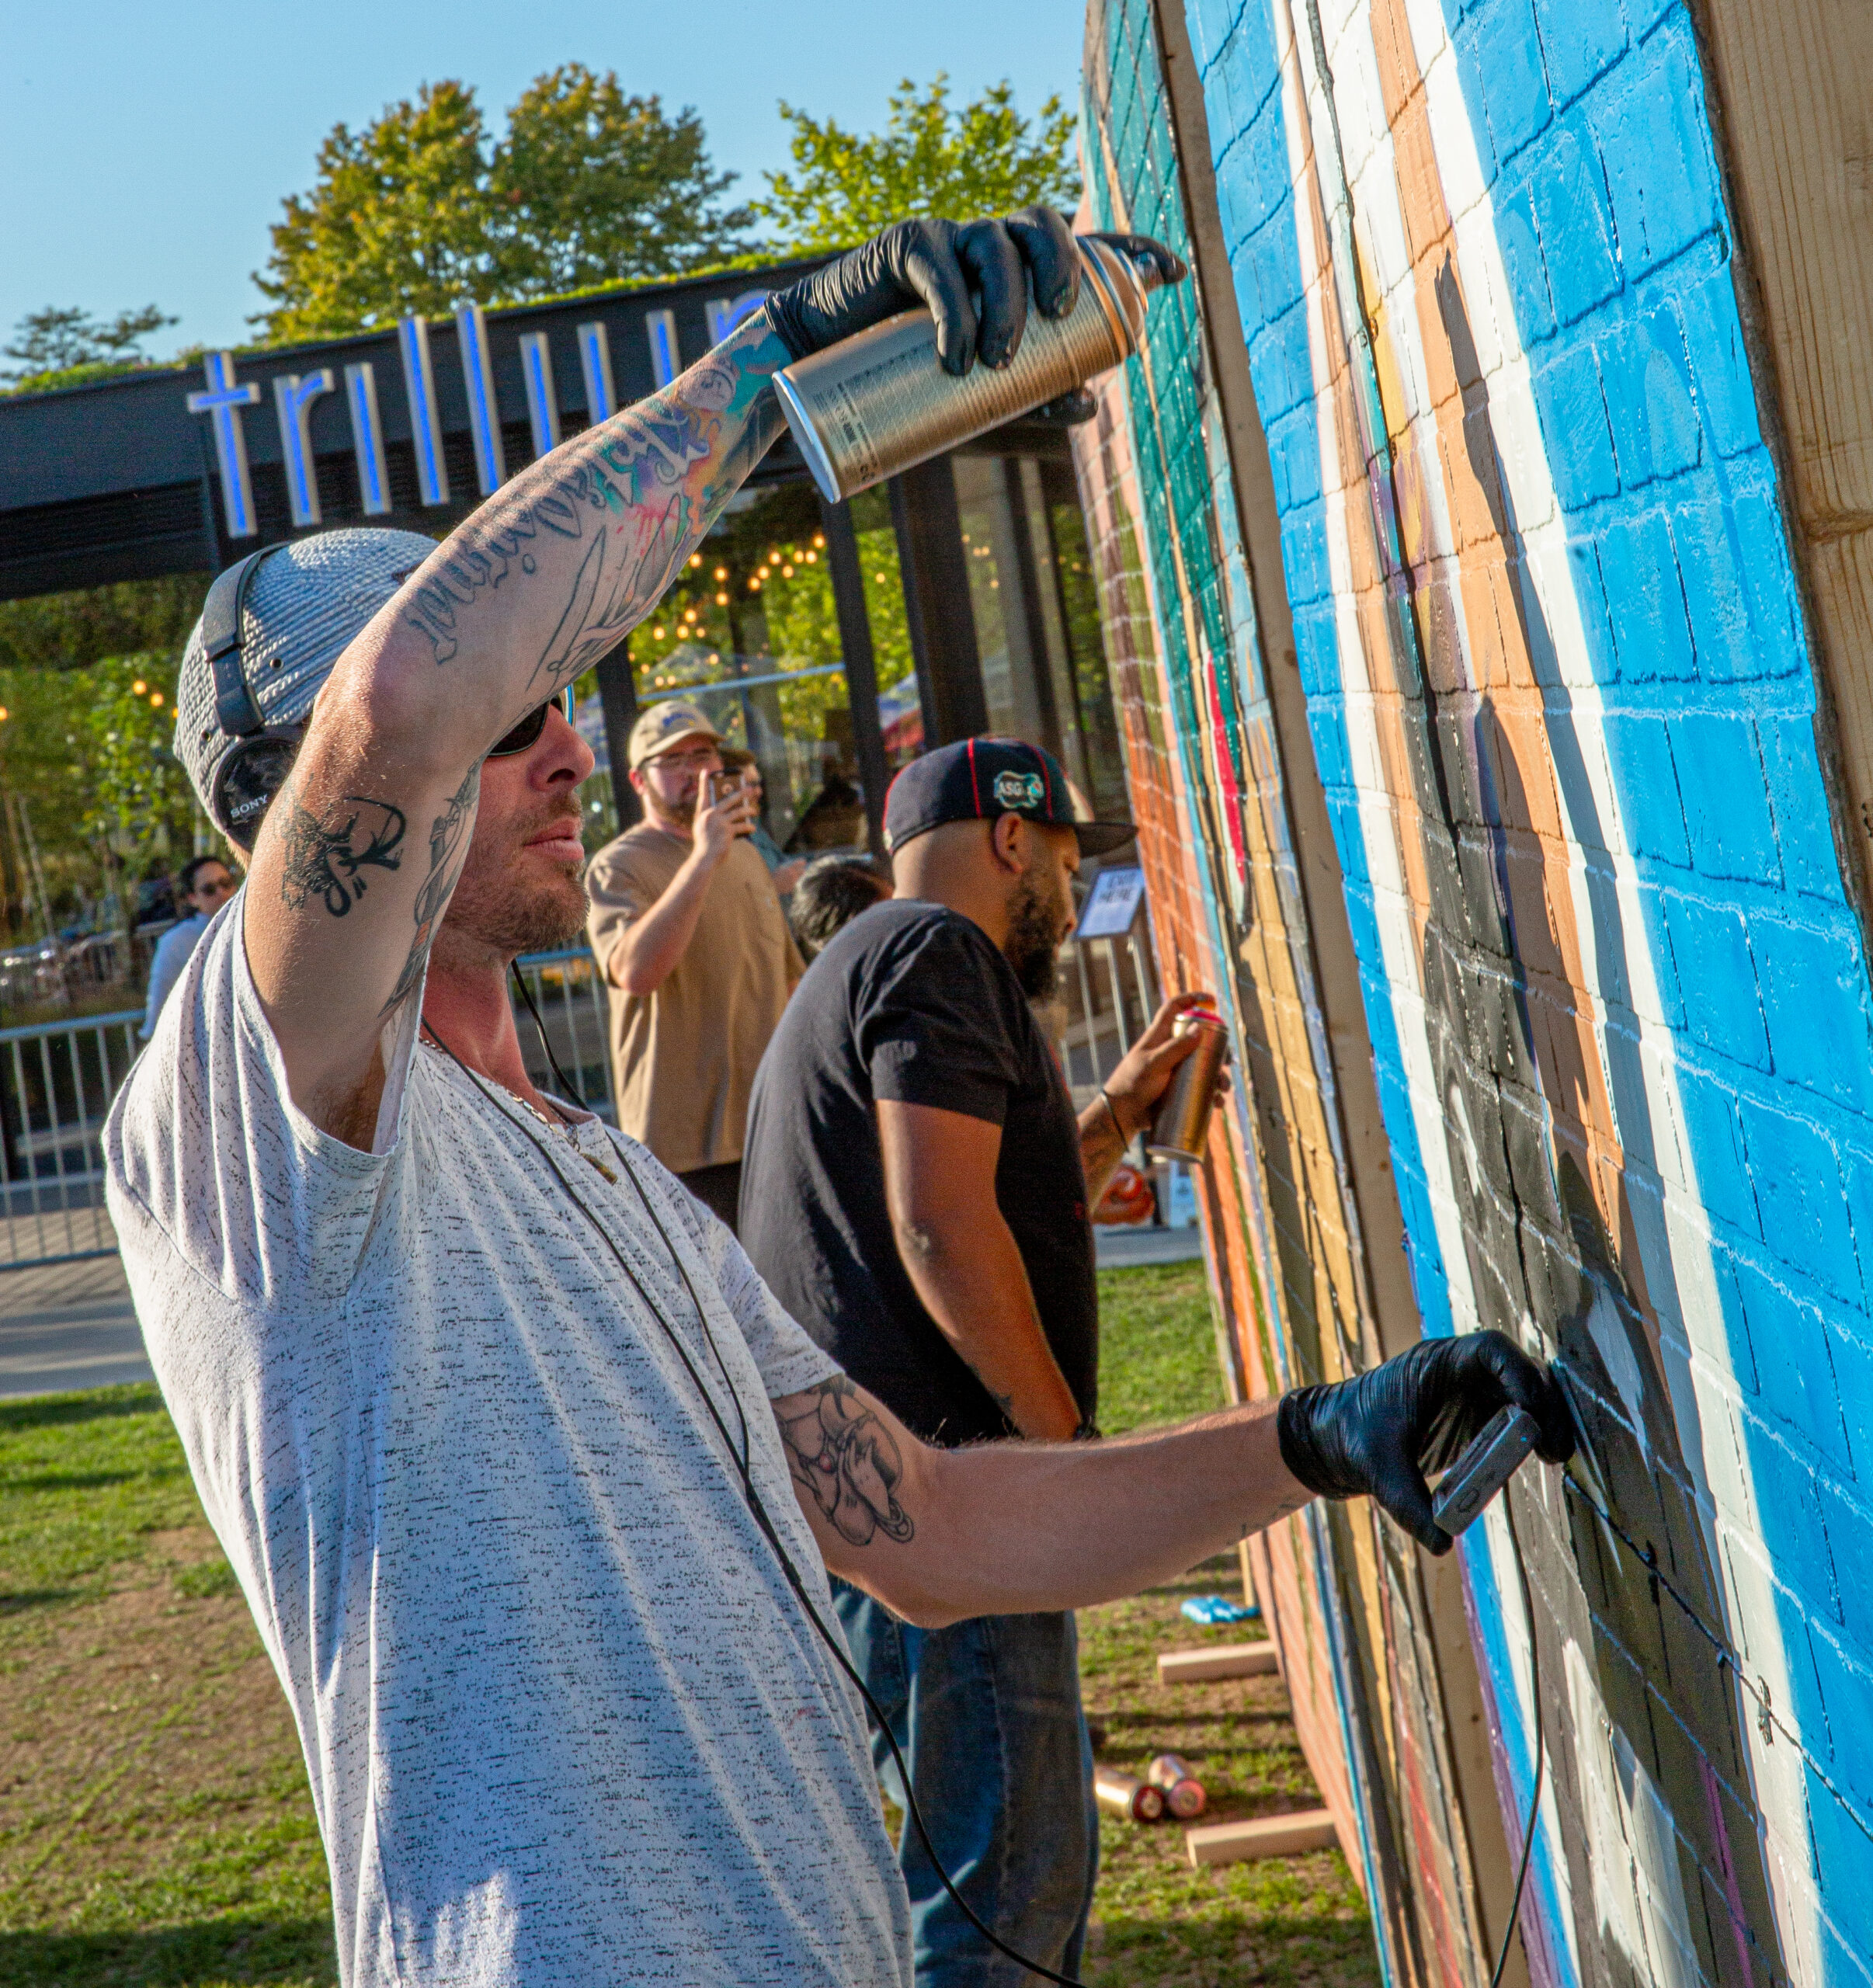 Two graffiti artists paint a wall outside of Trillium brewery while another man snaps a photo of them.